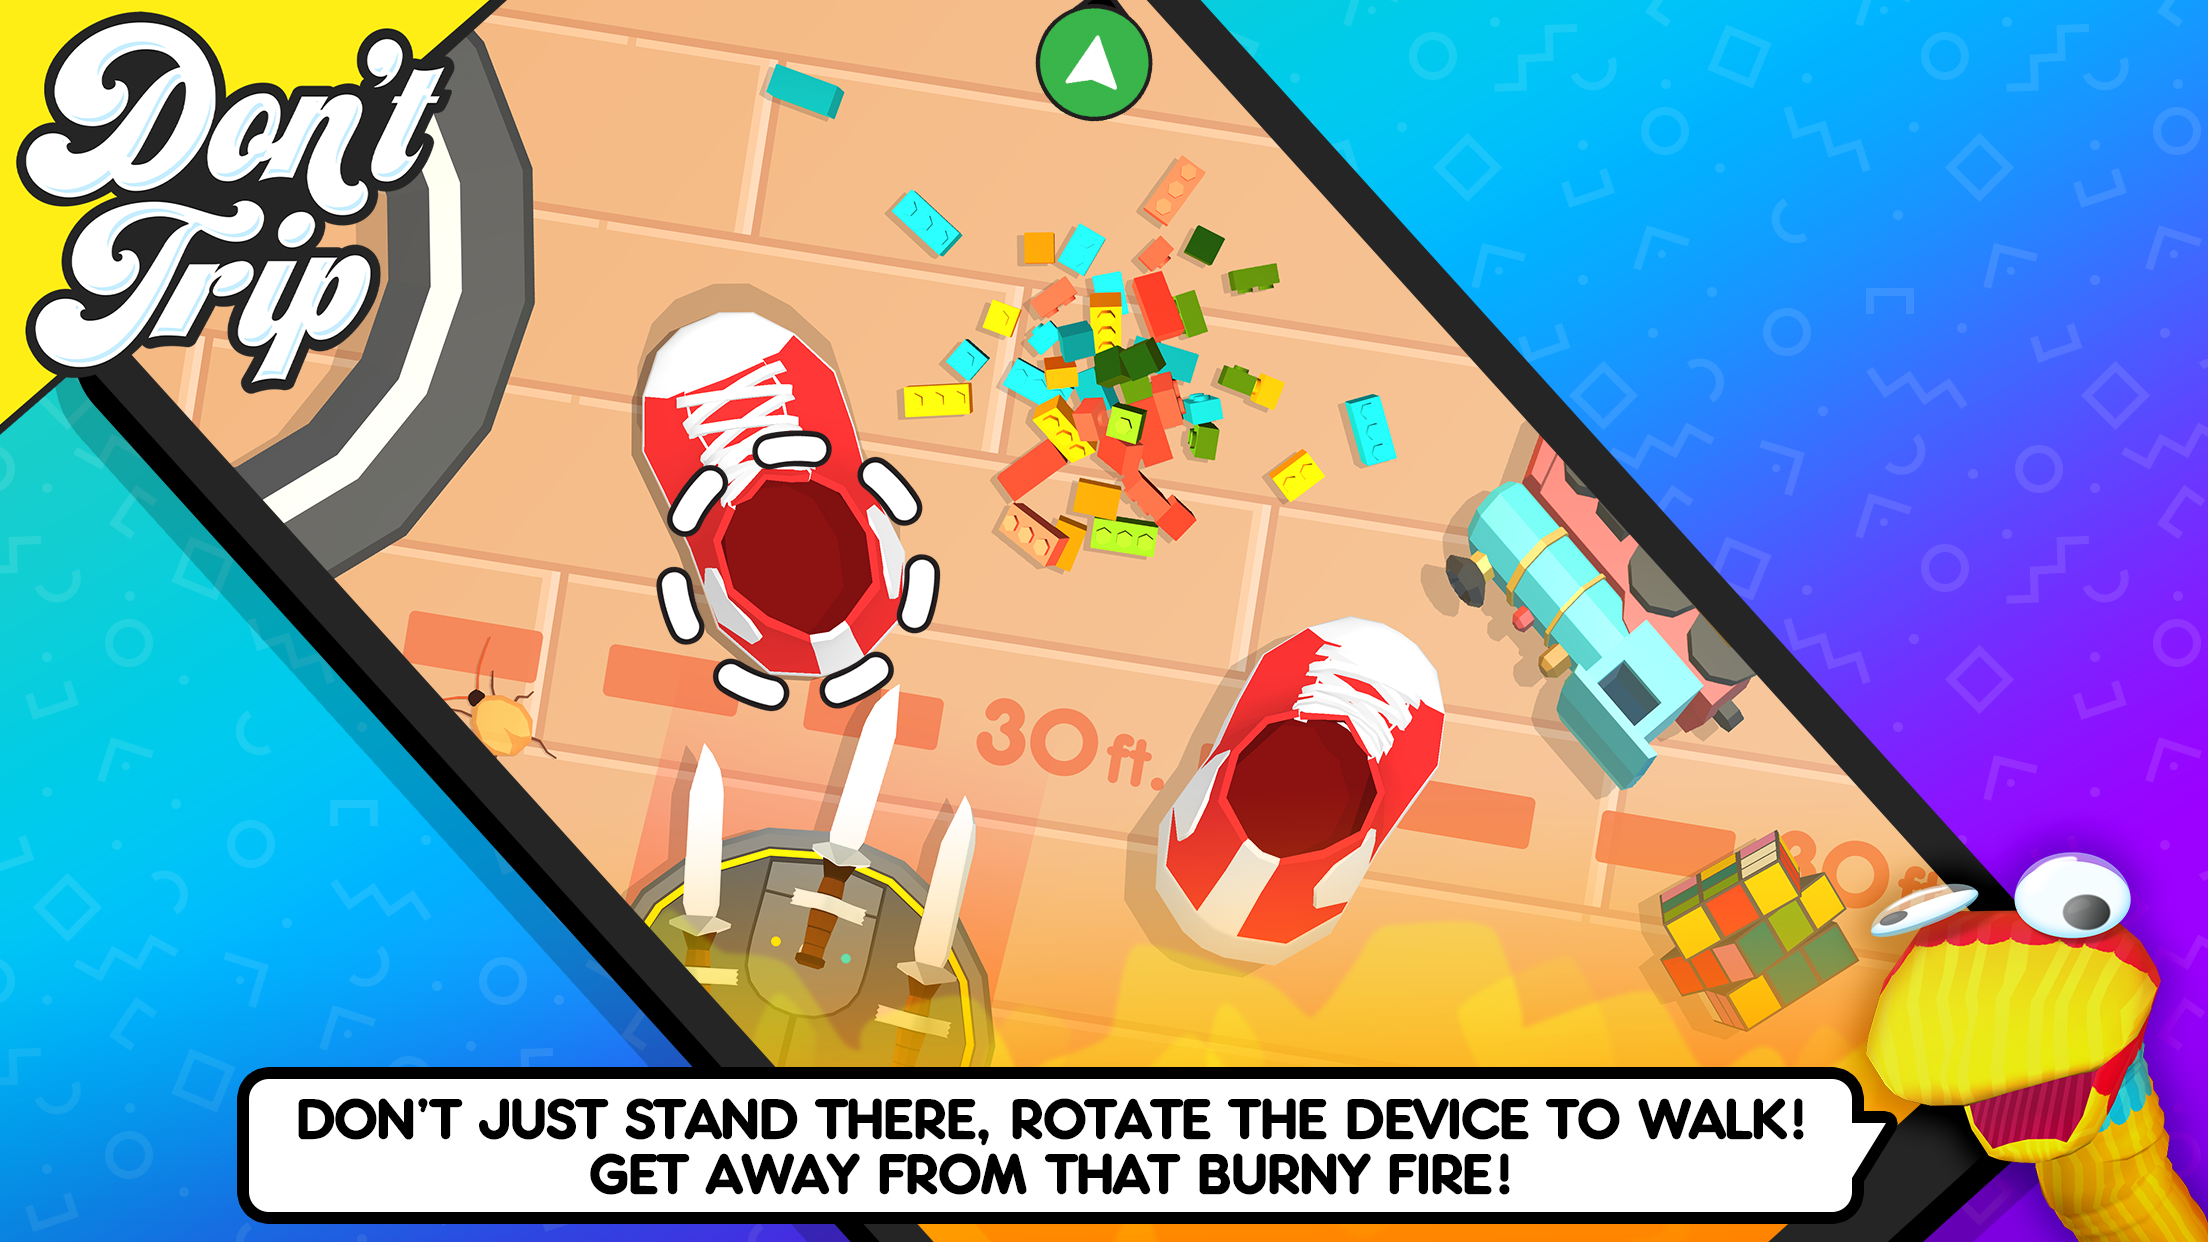 Dont first. Don't trip игра. Noodlecake игры полёт. Noodlecake Studios games. Dont first Android girl.